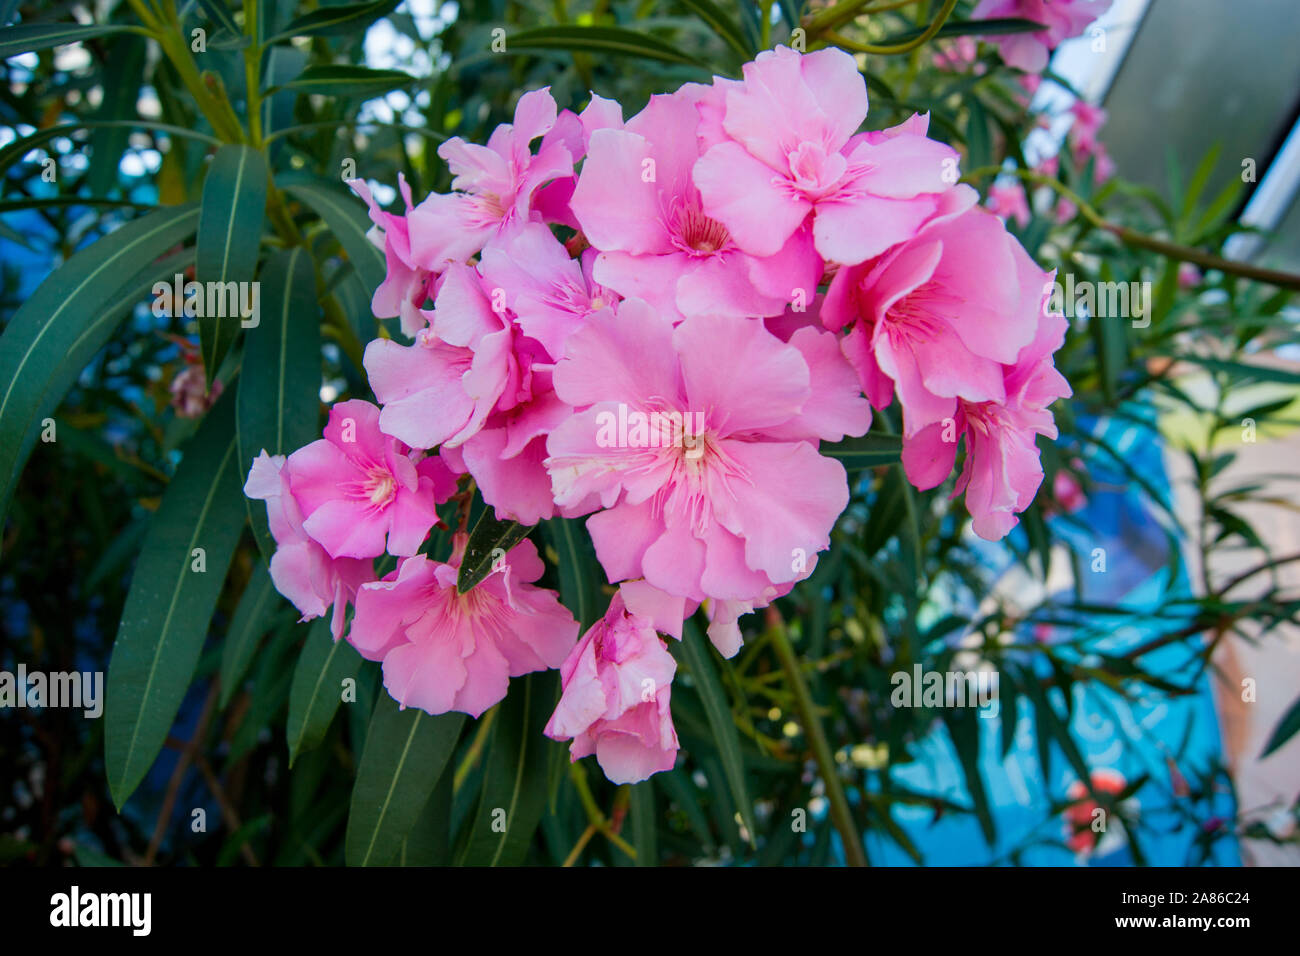 Lush clusters of pink oleander flowers. Horizontal photo. Stock Photo